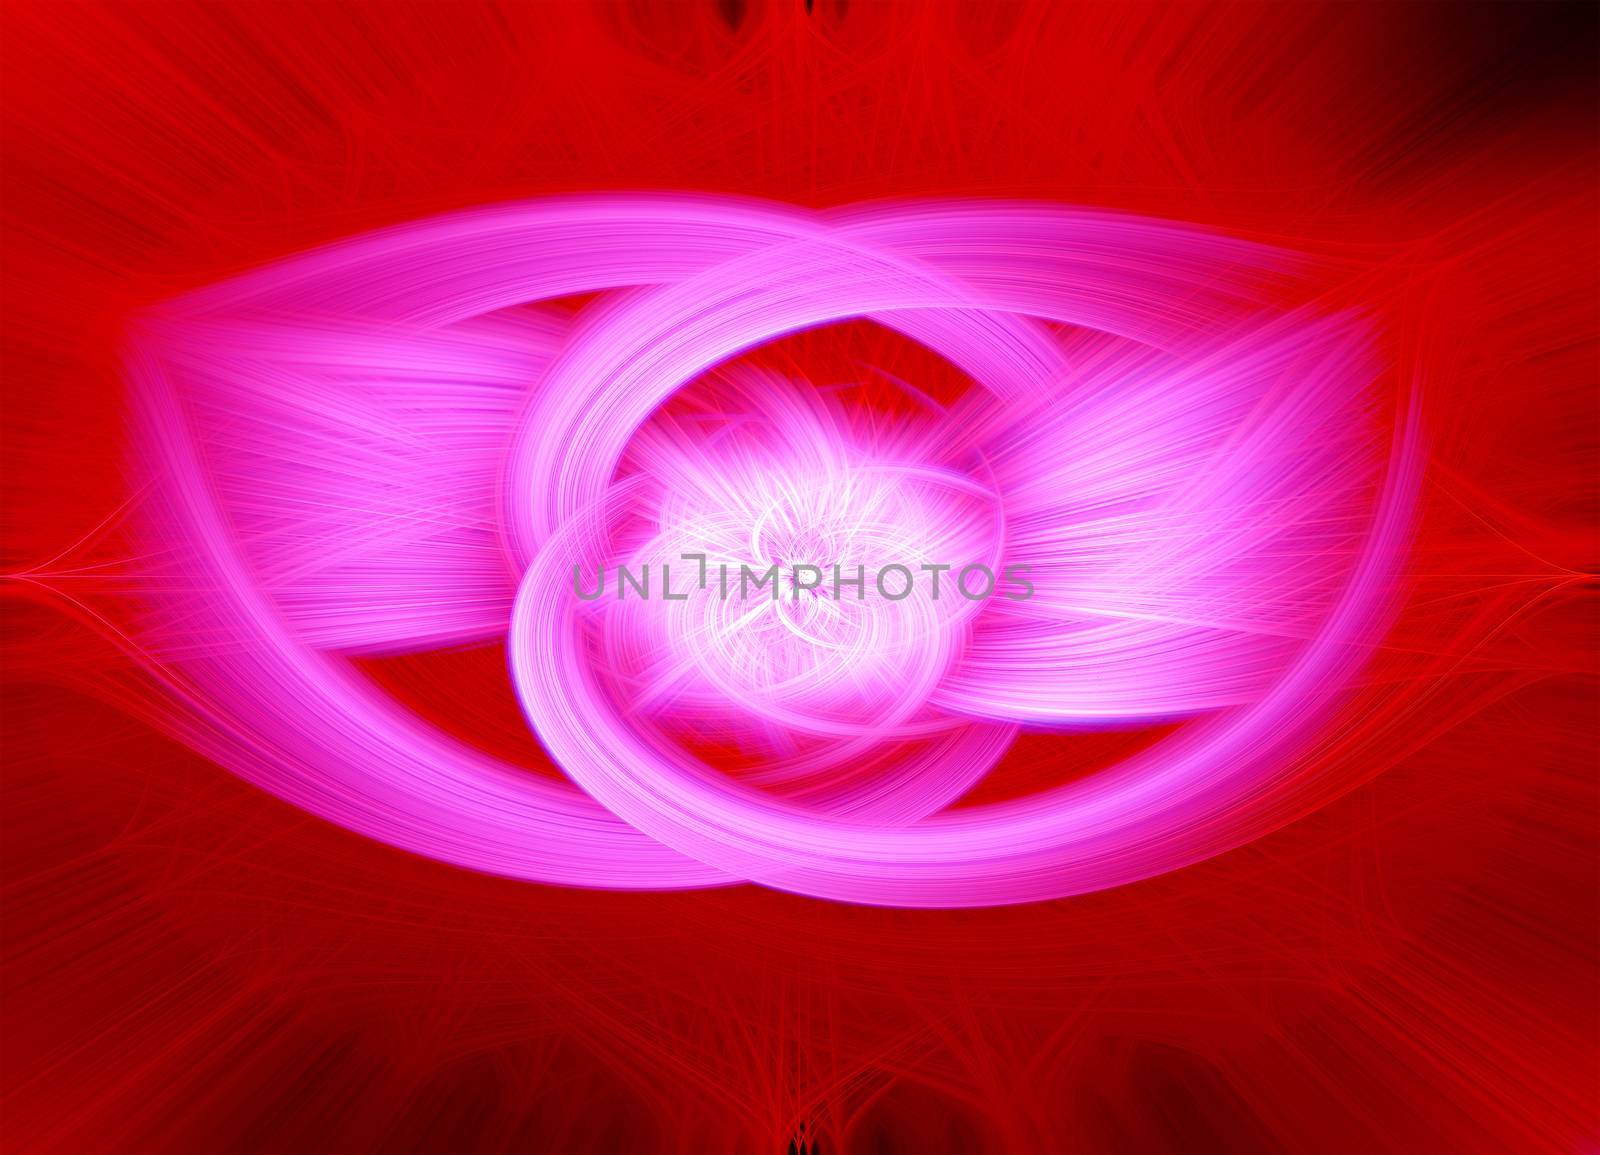 Beautiful abstract intertwined glowing 3d fibers forming a shape of sparkle, flame, flower, interlinked hearts. Maroon, white, red, and pink colors. Illustration.